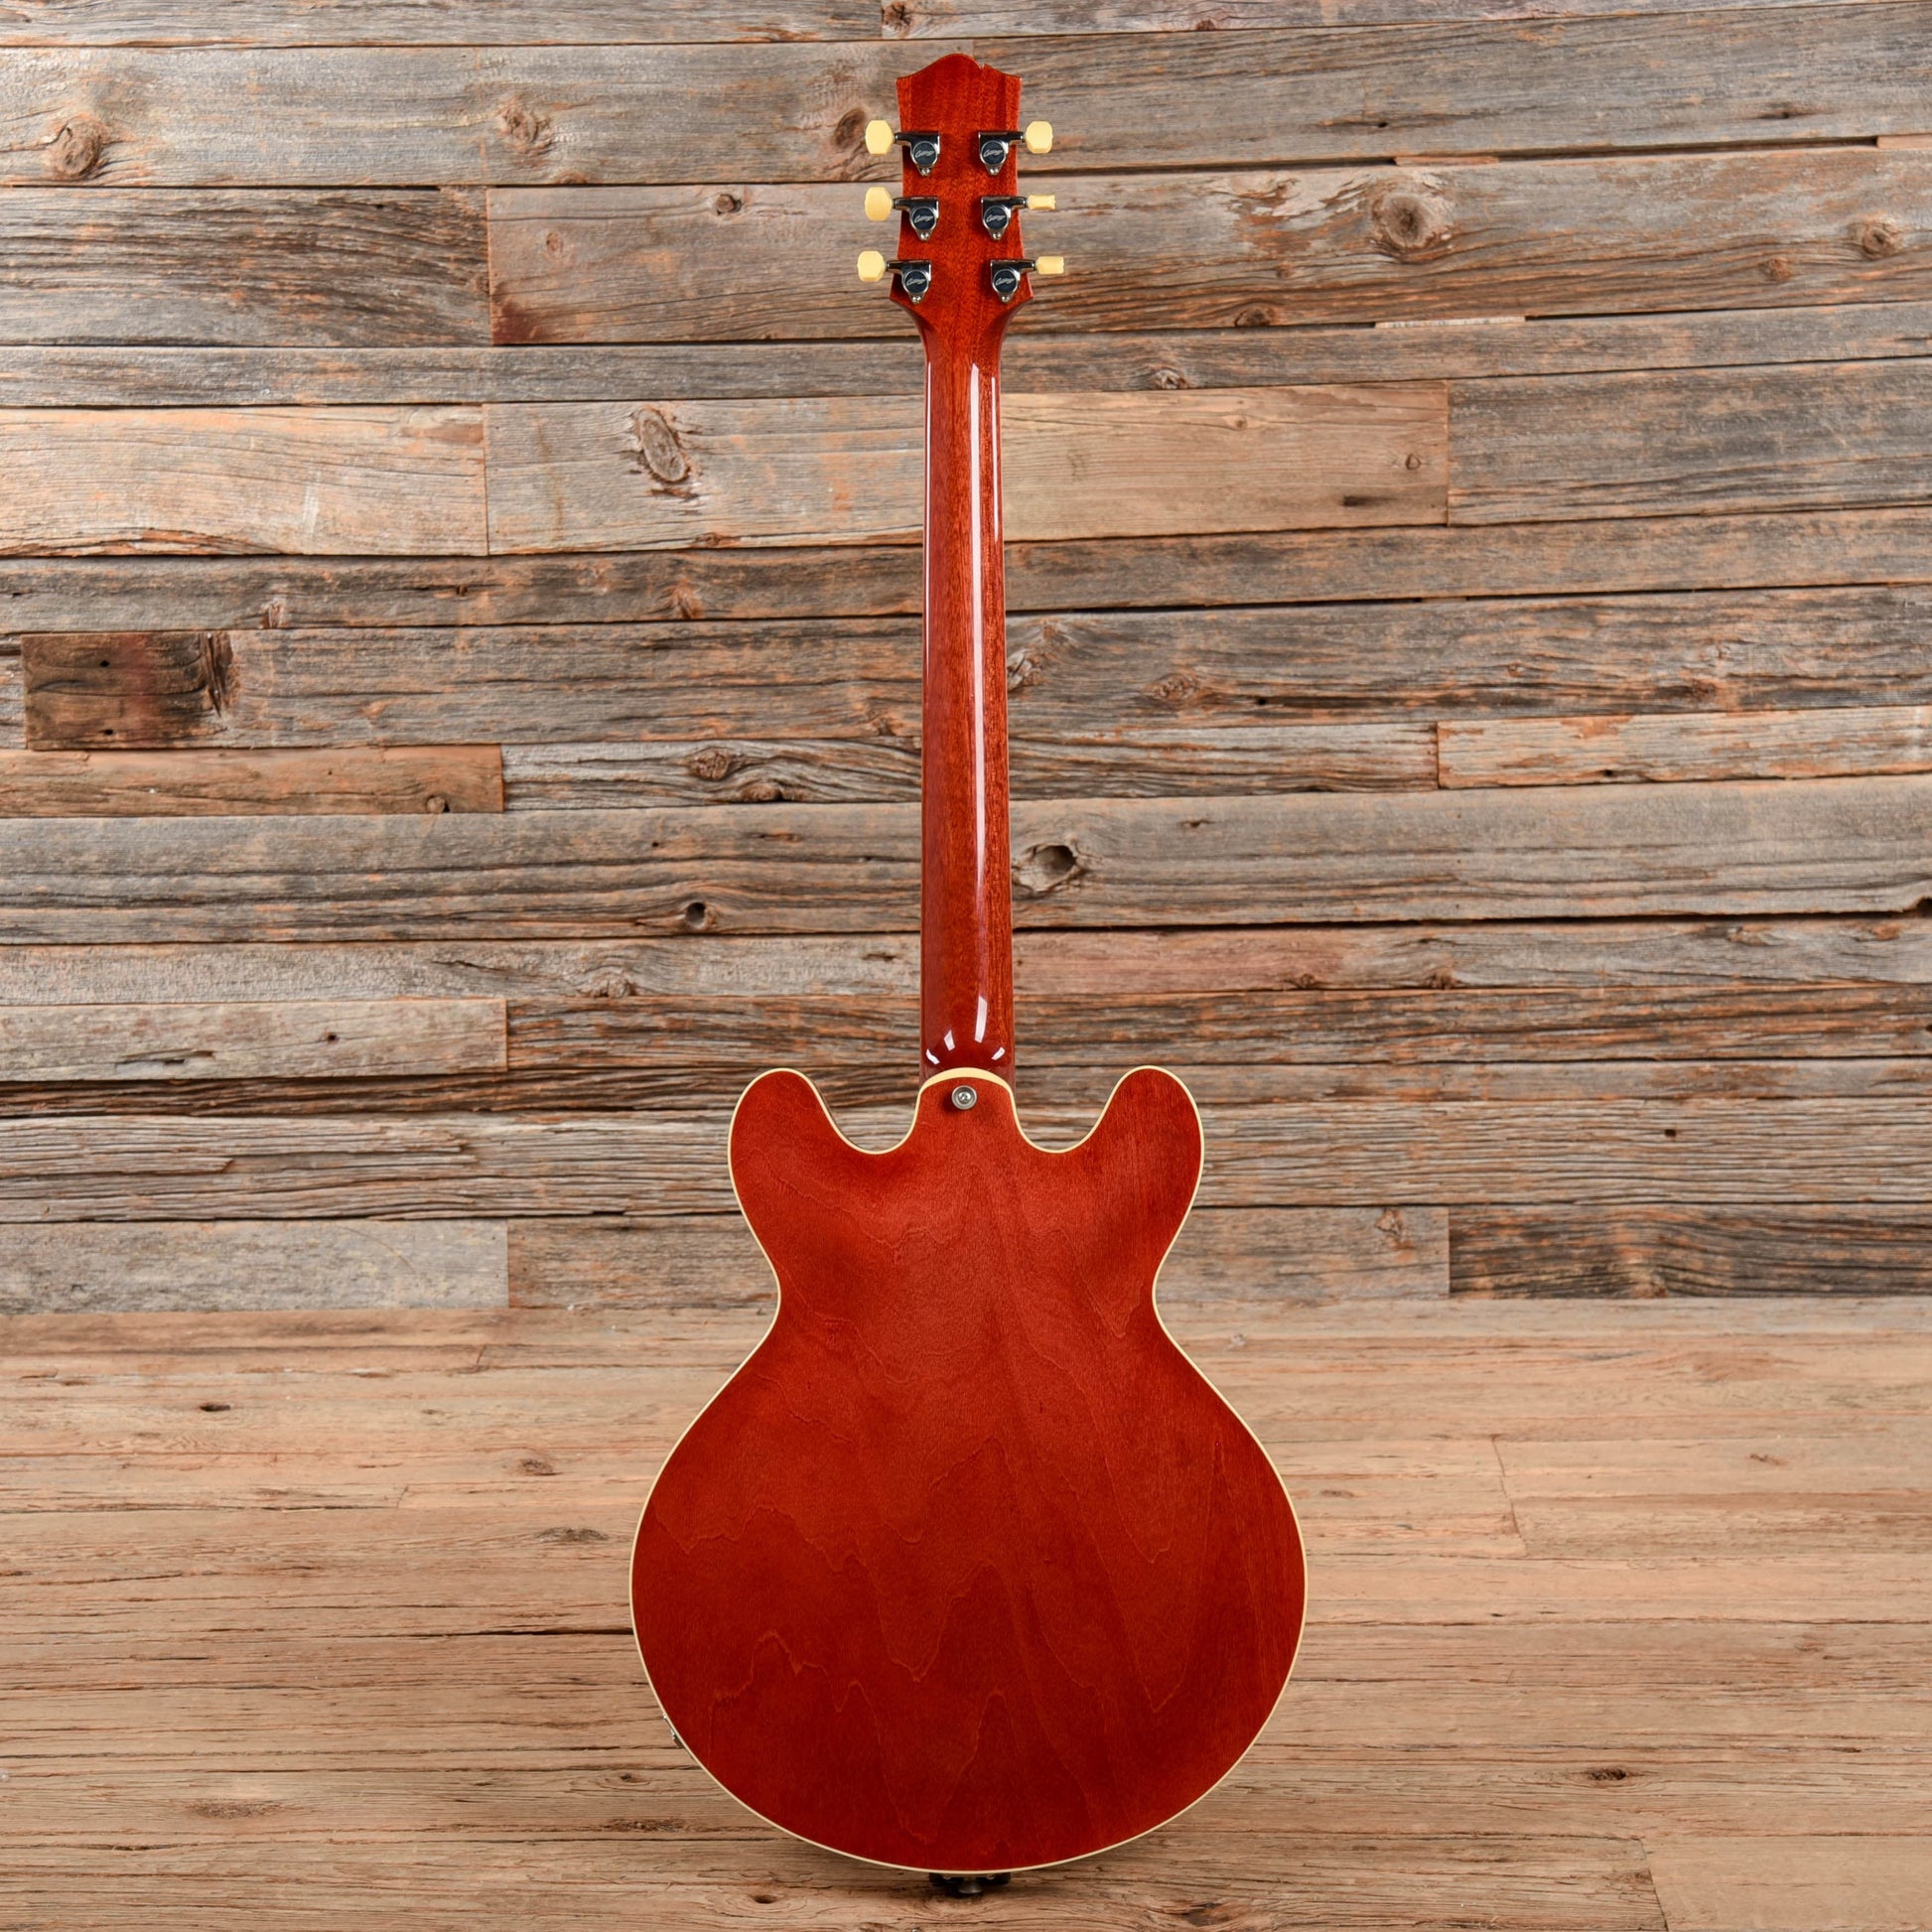 Collings I-35 LC Vintage Cherry 2021 Electric Guitars / Semi-Hollow